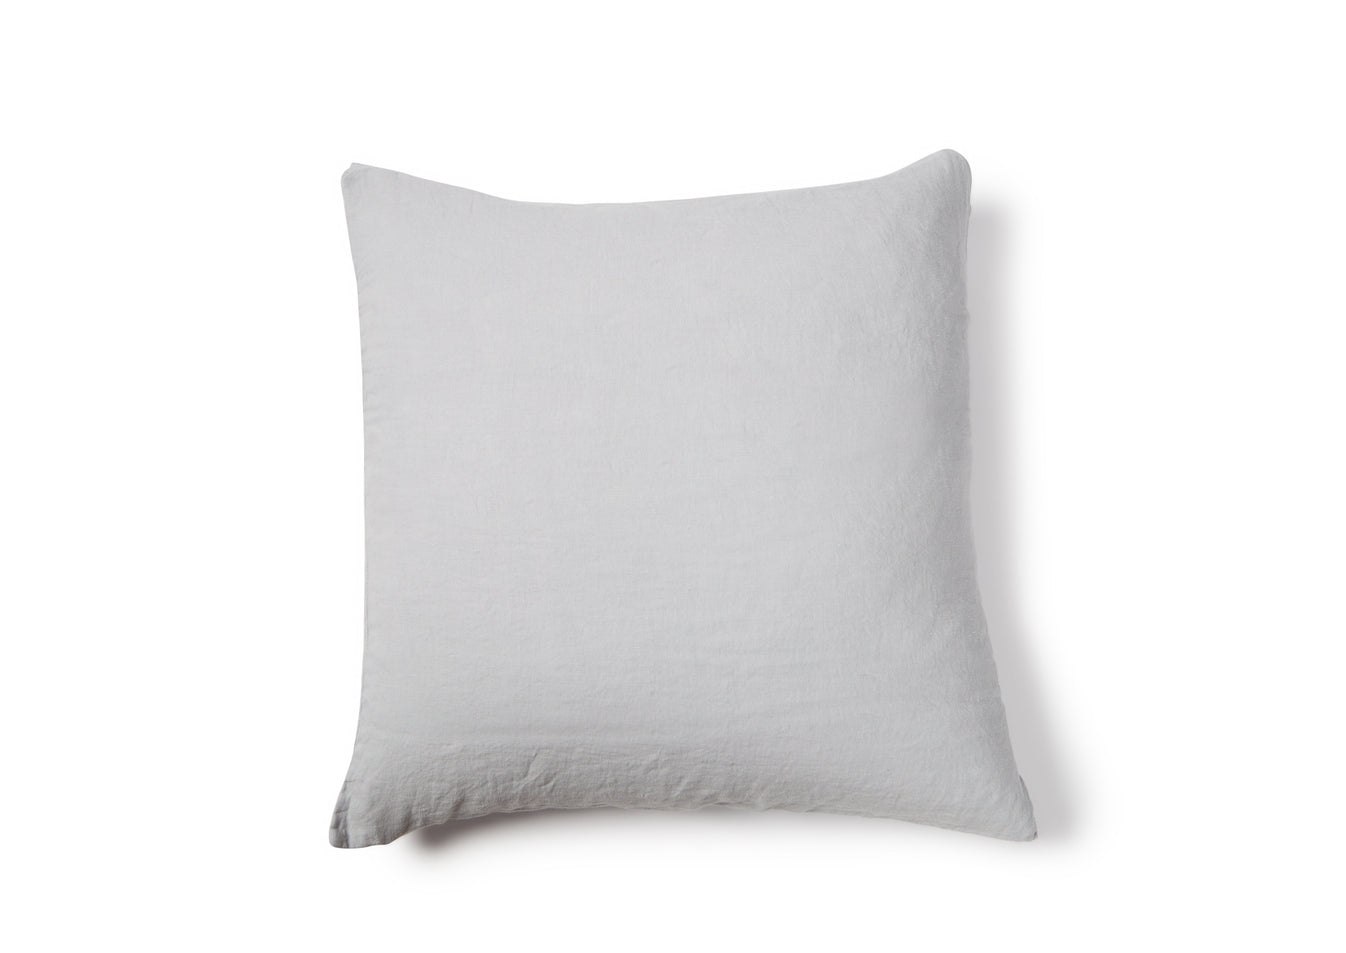 Light Gray Washed Linen Cushion Cover - Sky